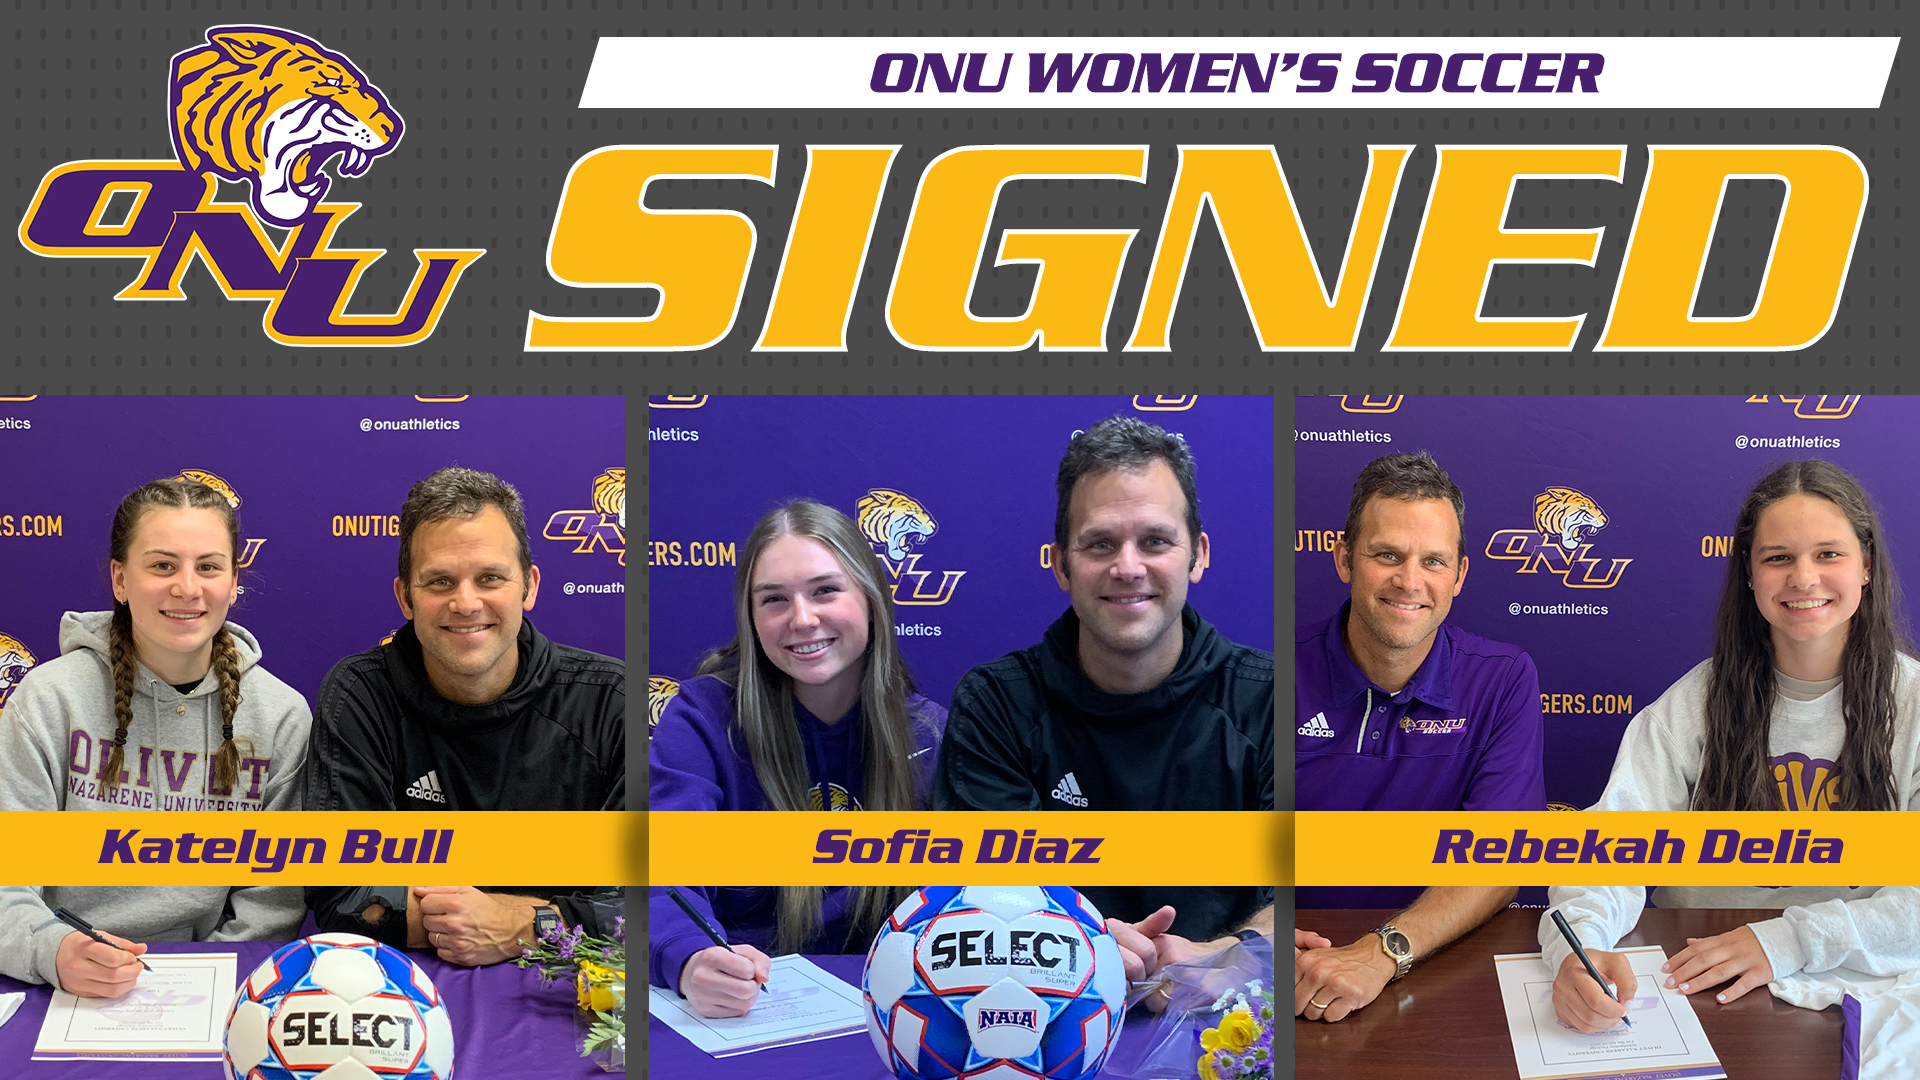 BAHR INKS BULL, DIAZ, AND DELIA TO INCOMING FRESHMAN SOCCER CLASS